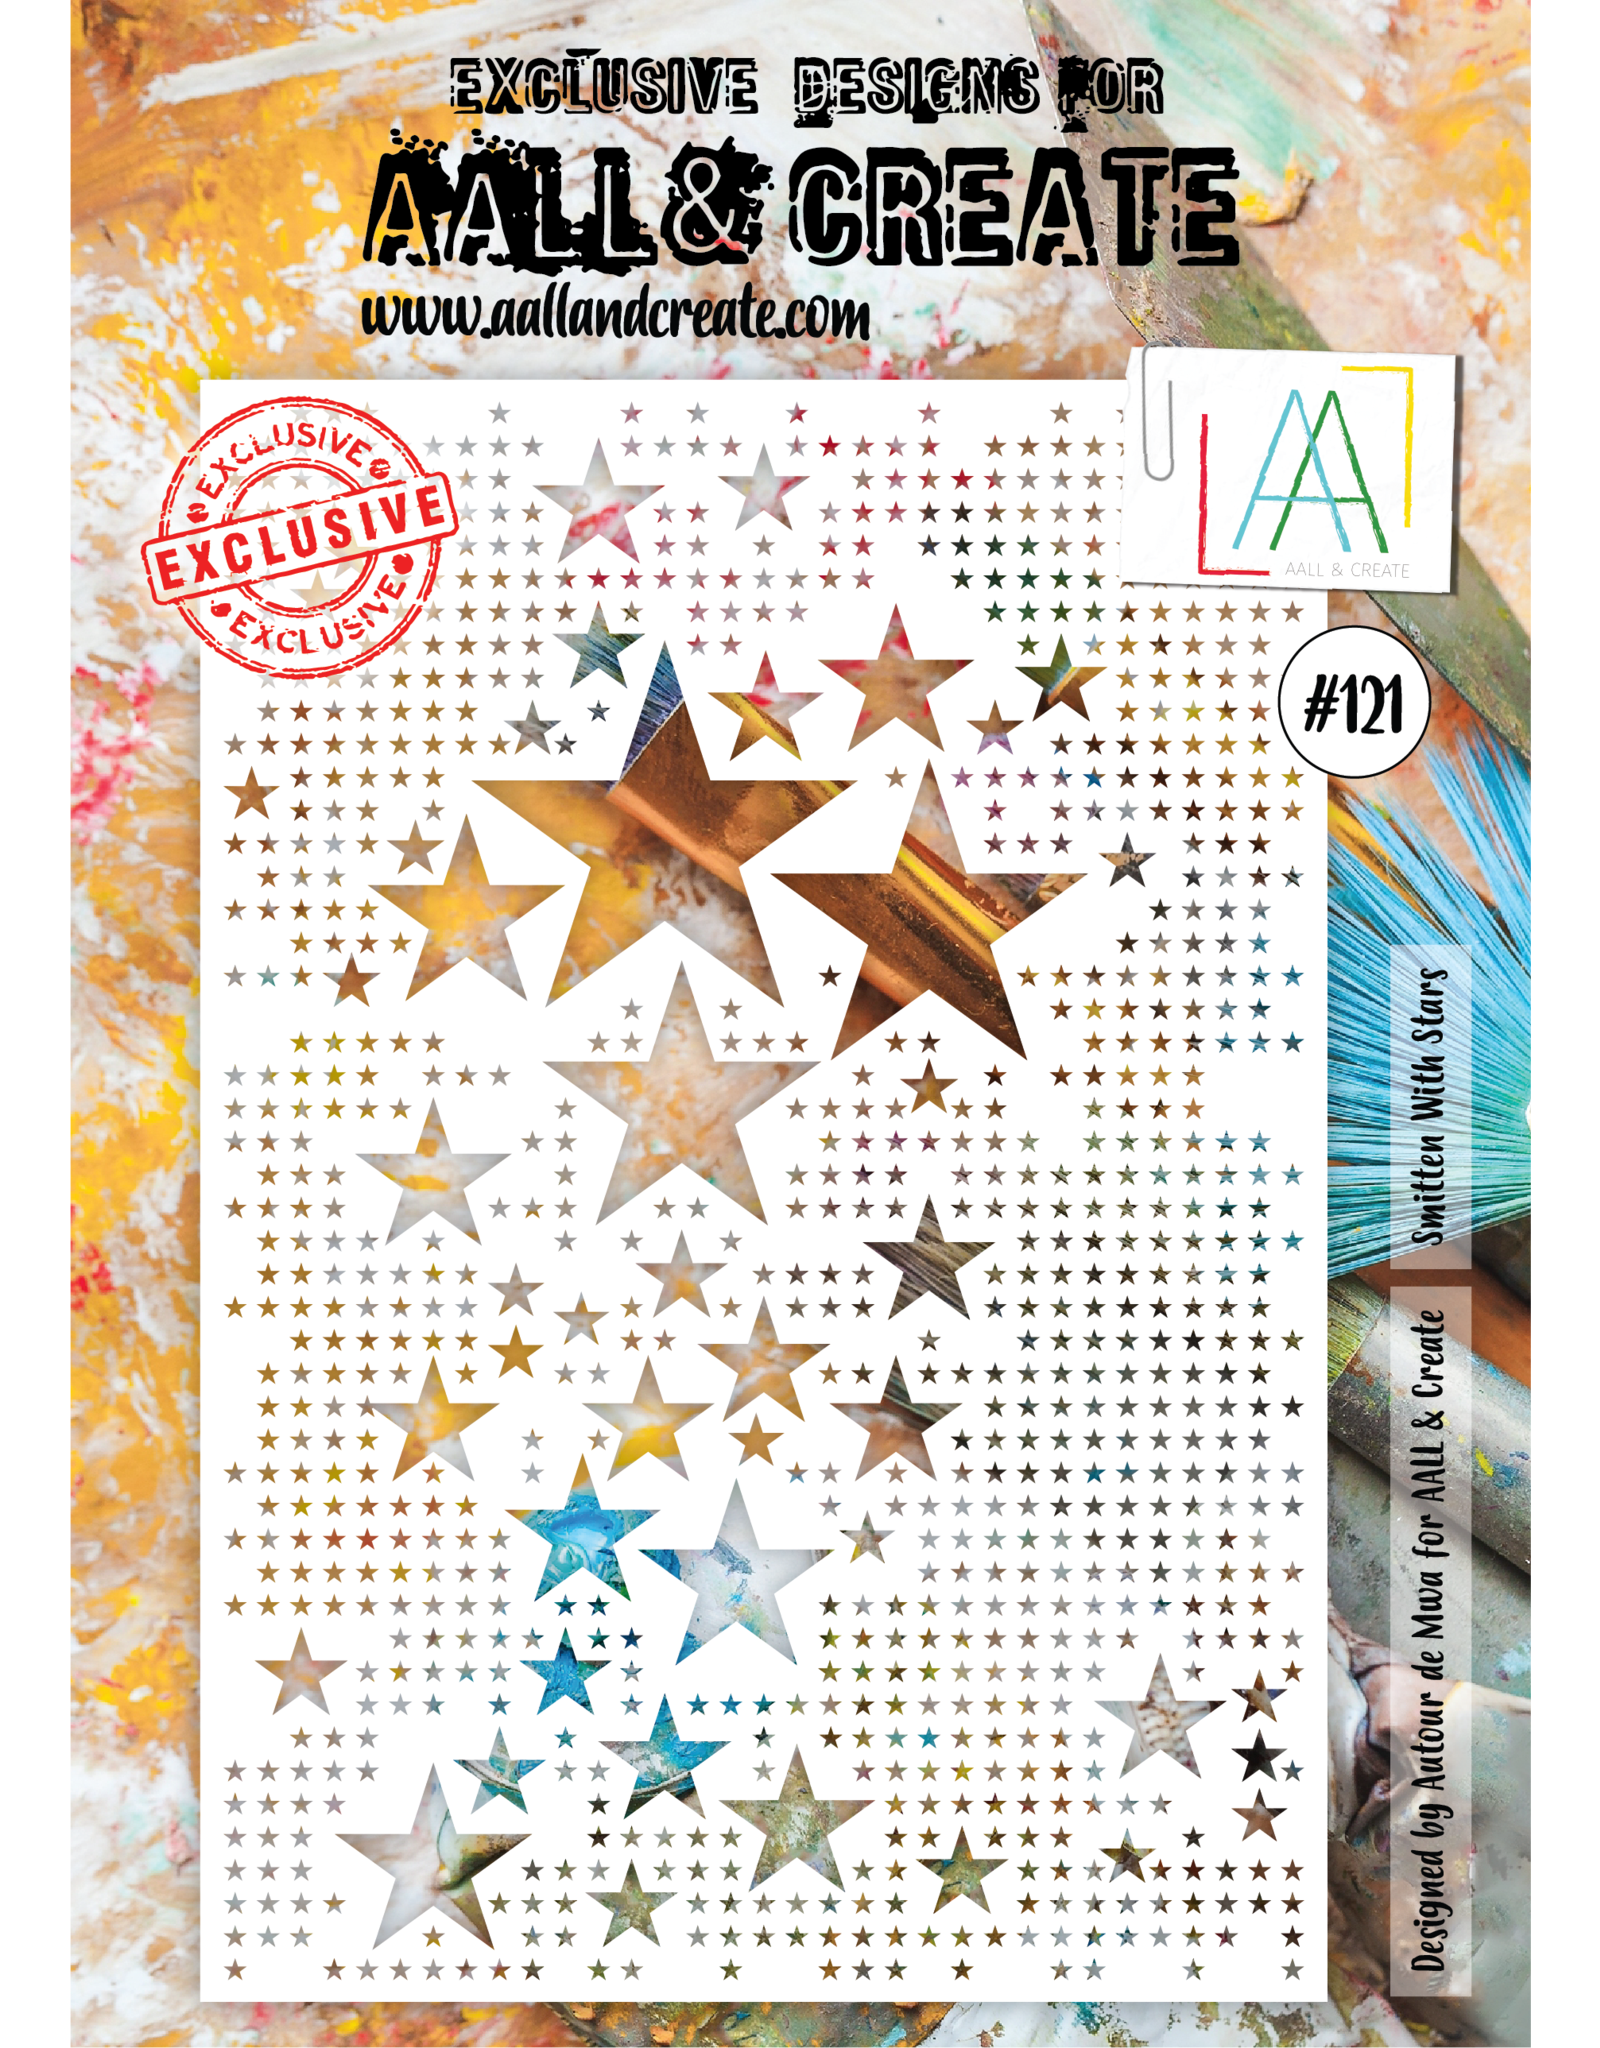 AALL & CREATE AALL & CREATE AUTOUR DE MWA #121 SMITTEN WITH STARS STENCIL A4